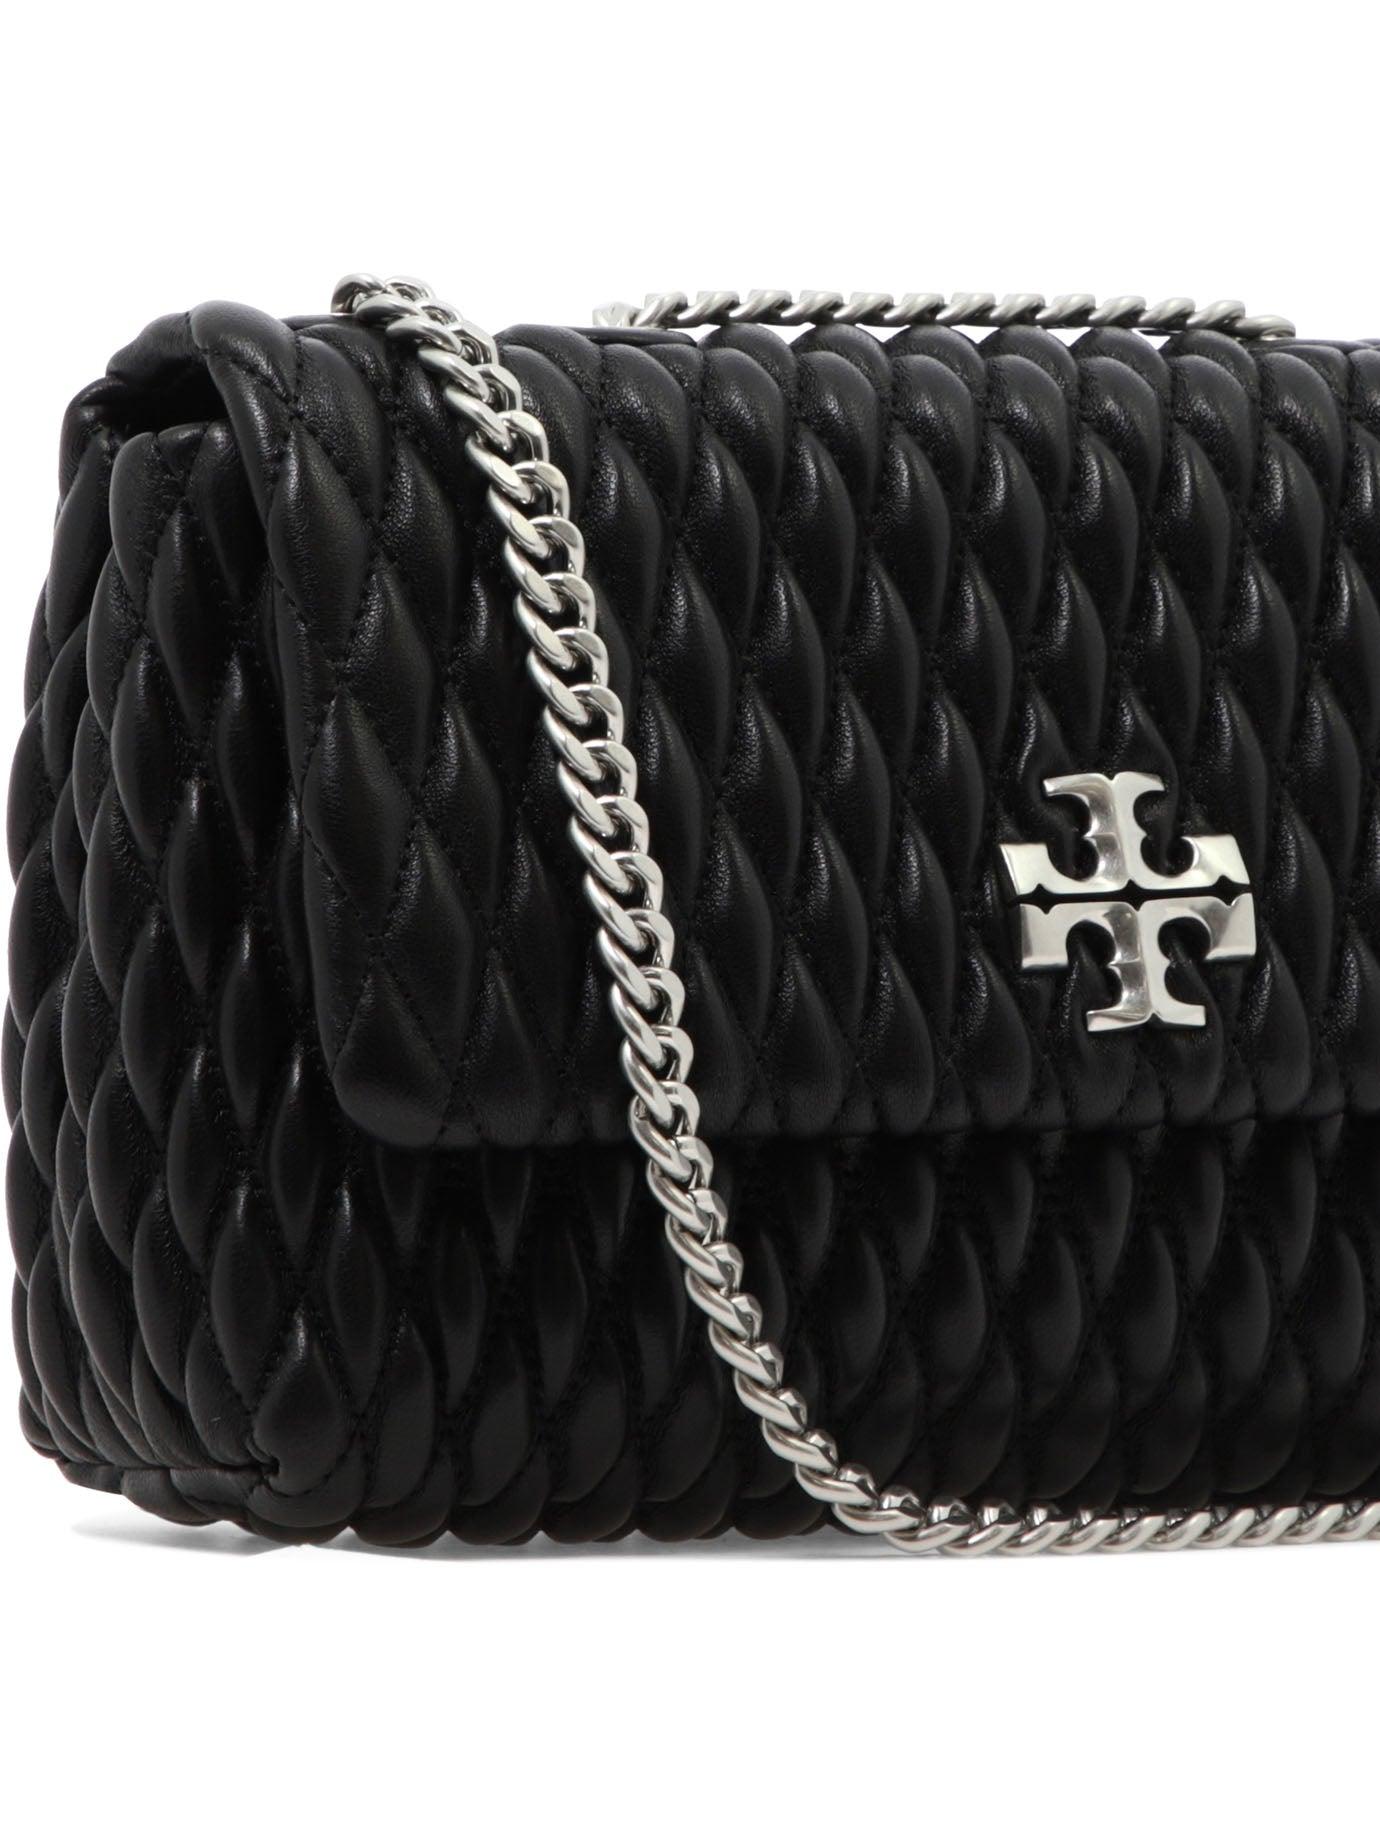 Tory Burch Small Kira Ruched Shoulder Bag in Black | Lyst